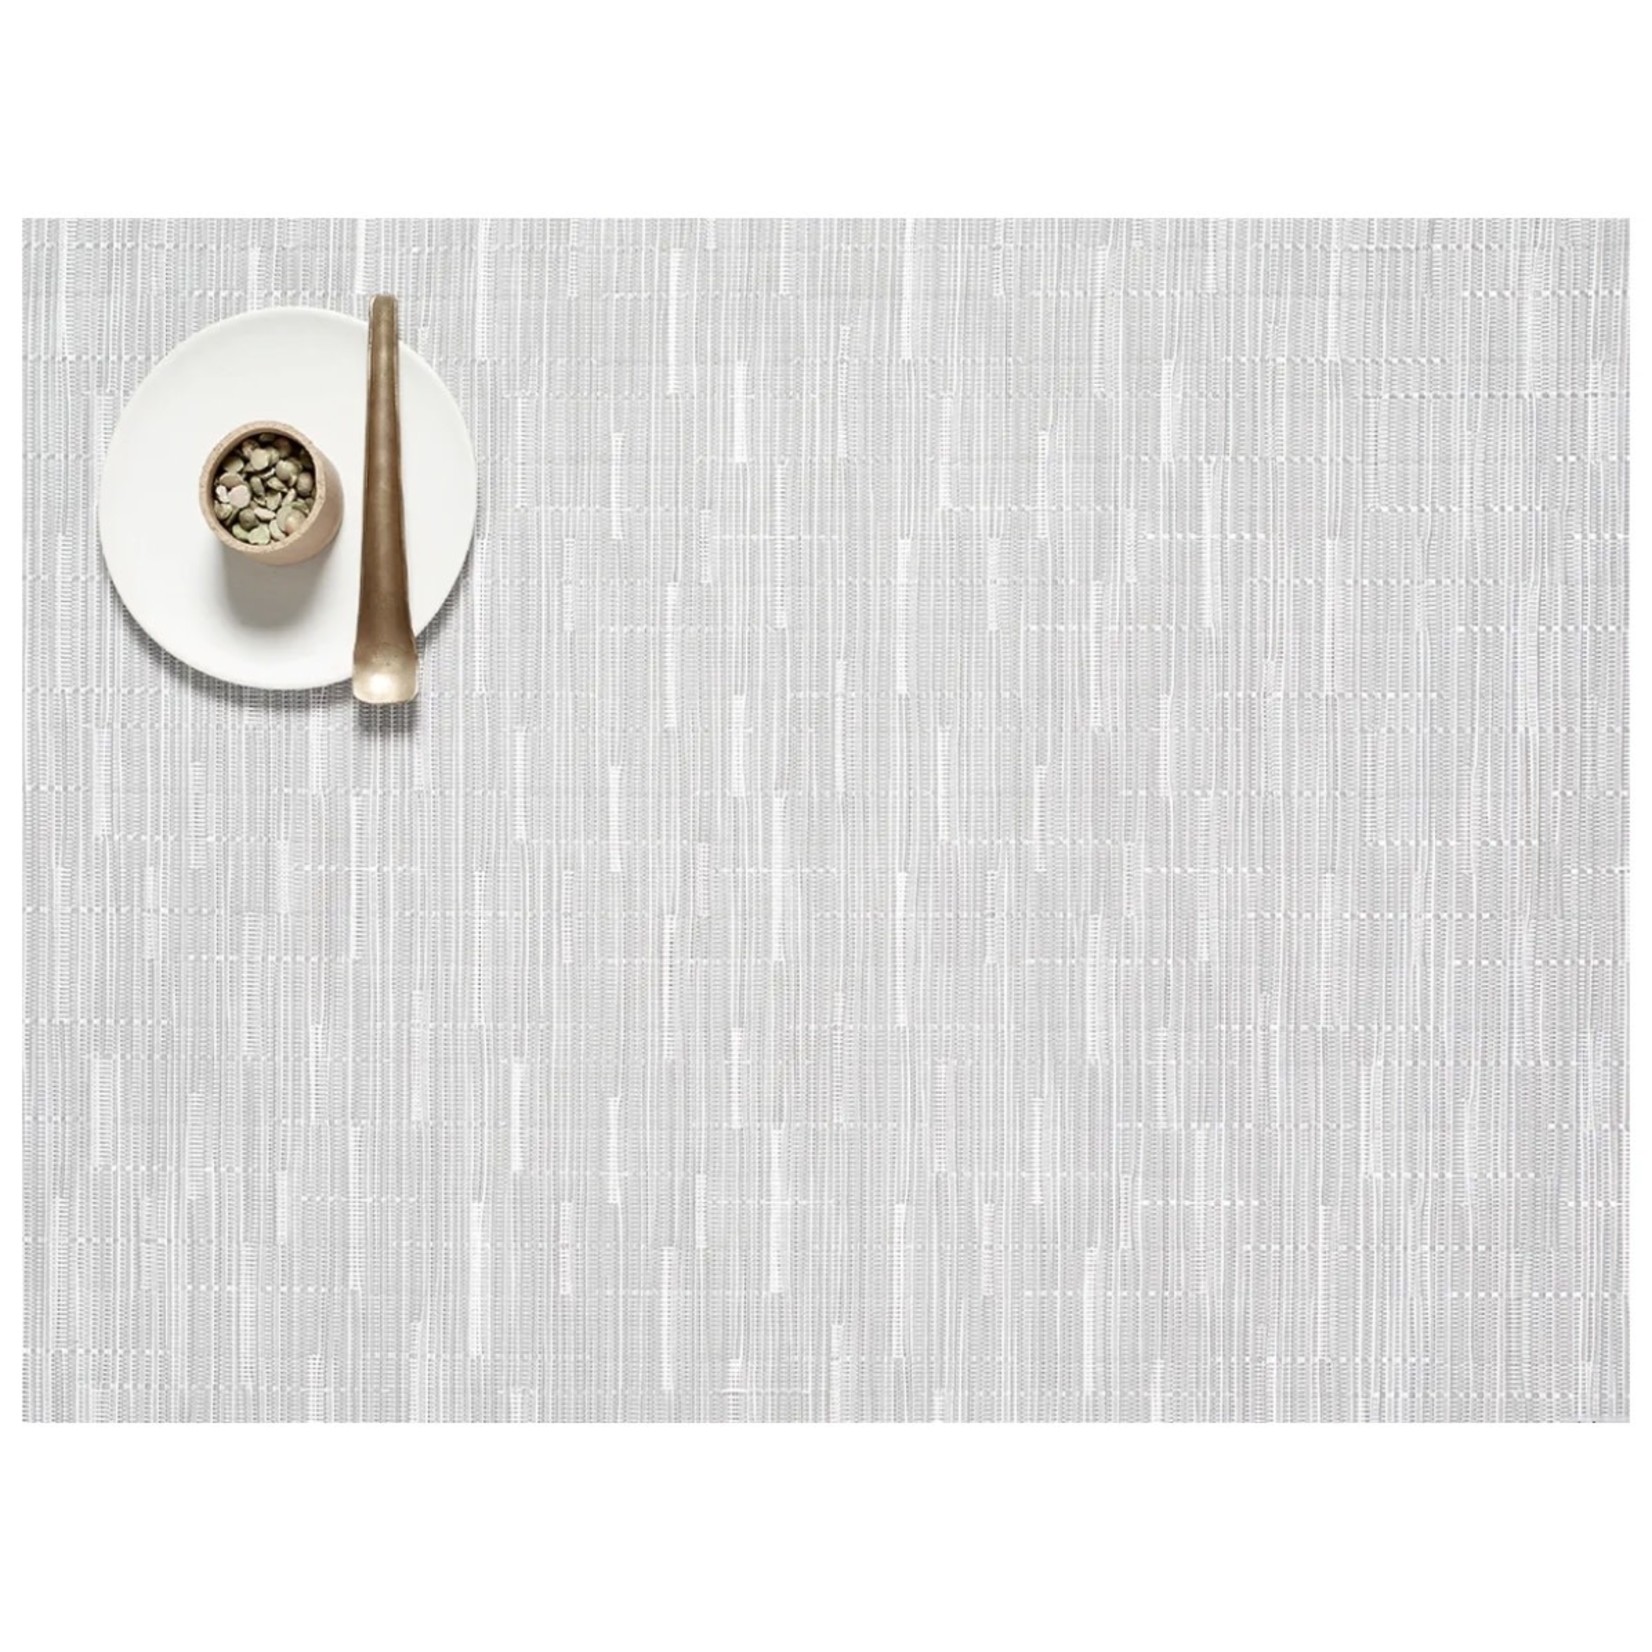 CHILEWICH CHILEWICH Bamboo Placemat Moonlight DNR